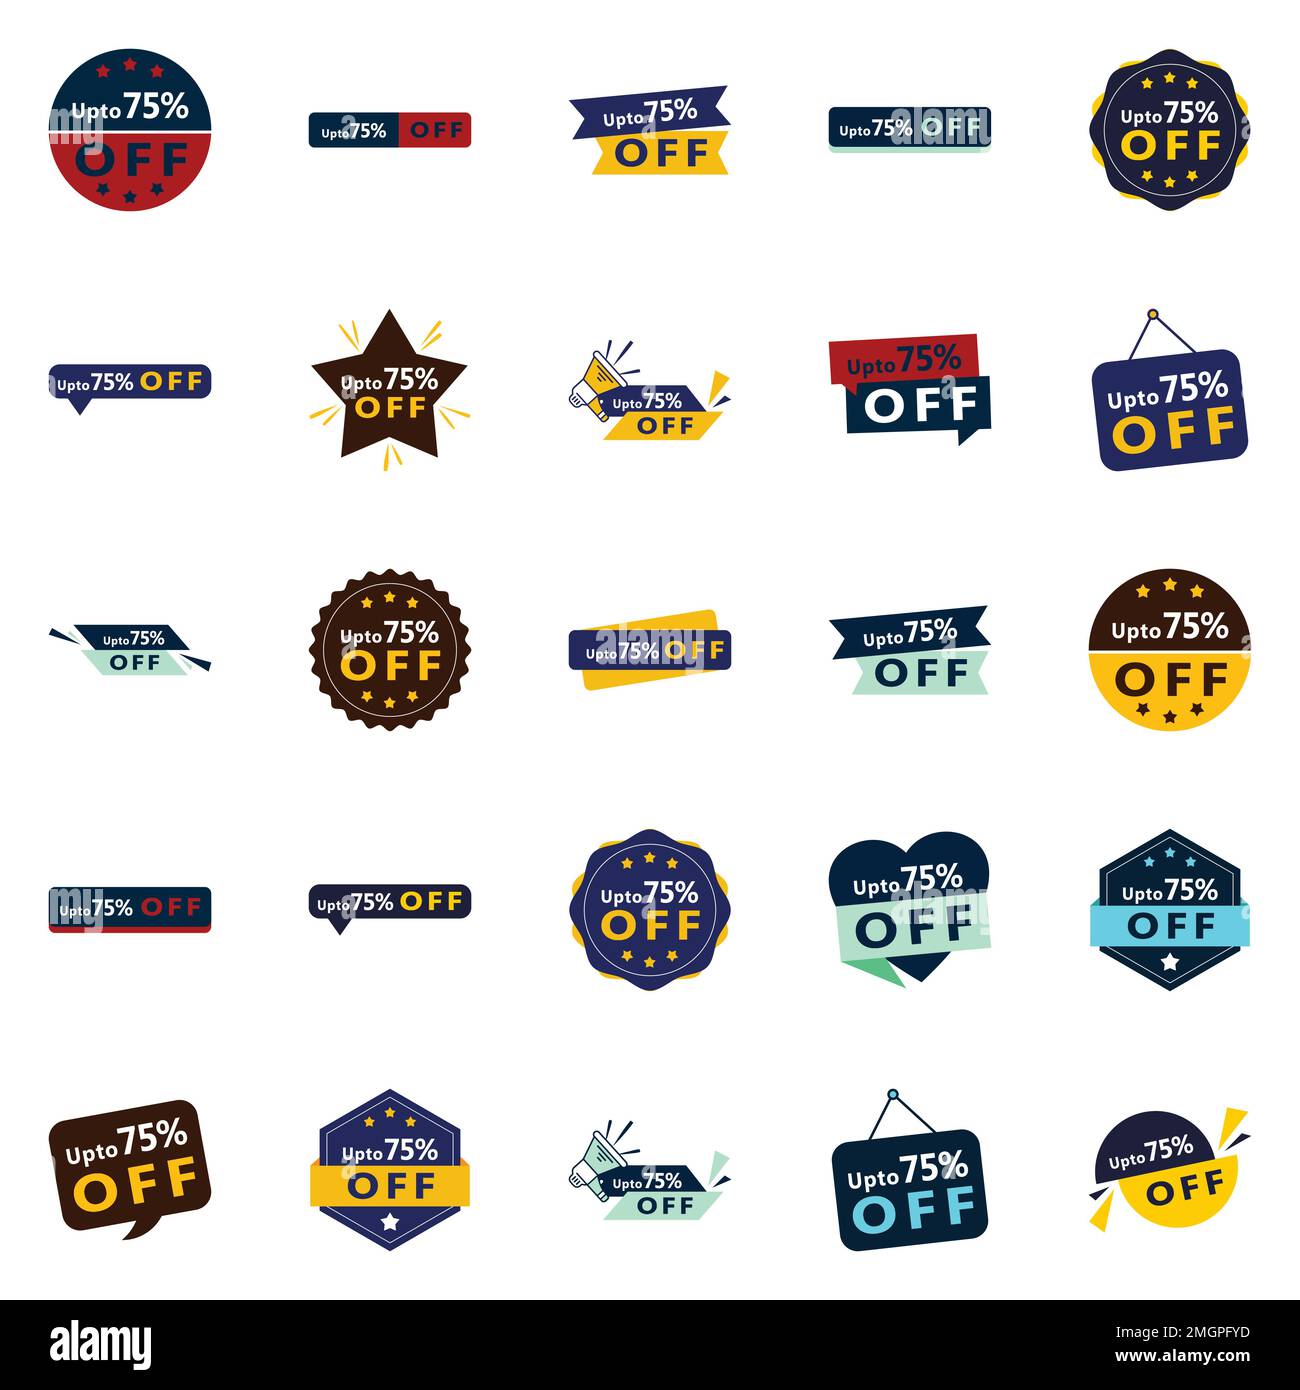 25 Premium Vector Designs in the Up to 70% Off Pack Perfect for Sale ...